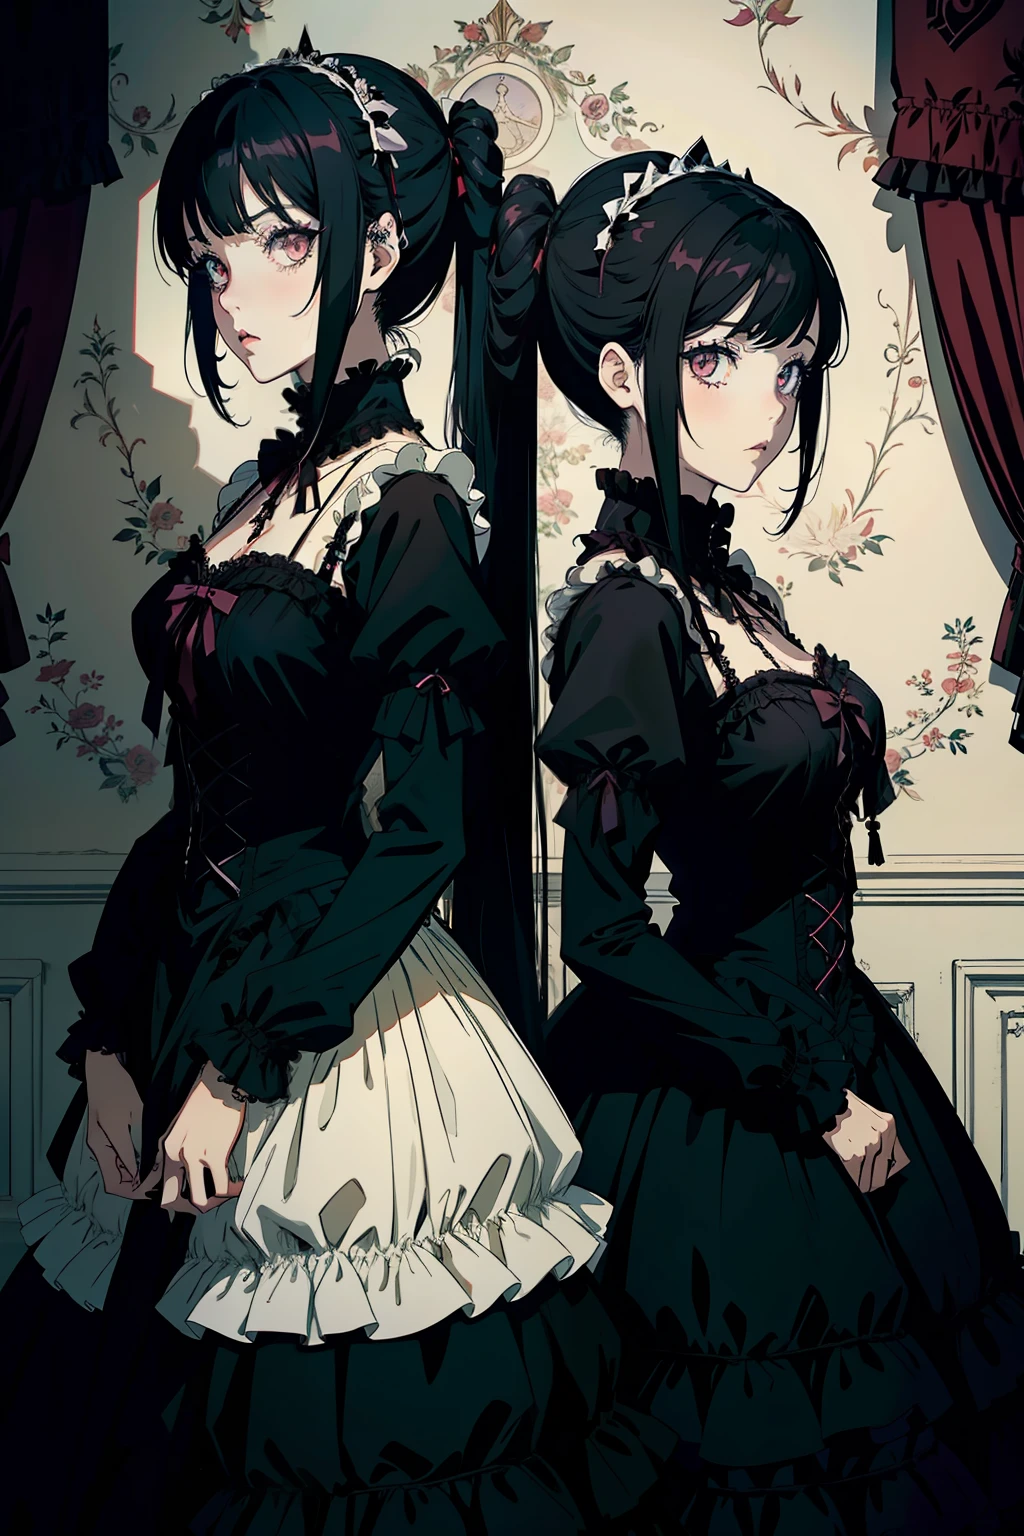 anime, goth girl, emo girl, long hair, lolita hair, gothic dress, black dress, victorian dress, white eyes, gothic art style, in a mansion, two maids behind,